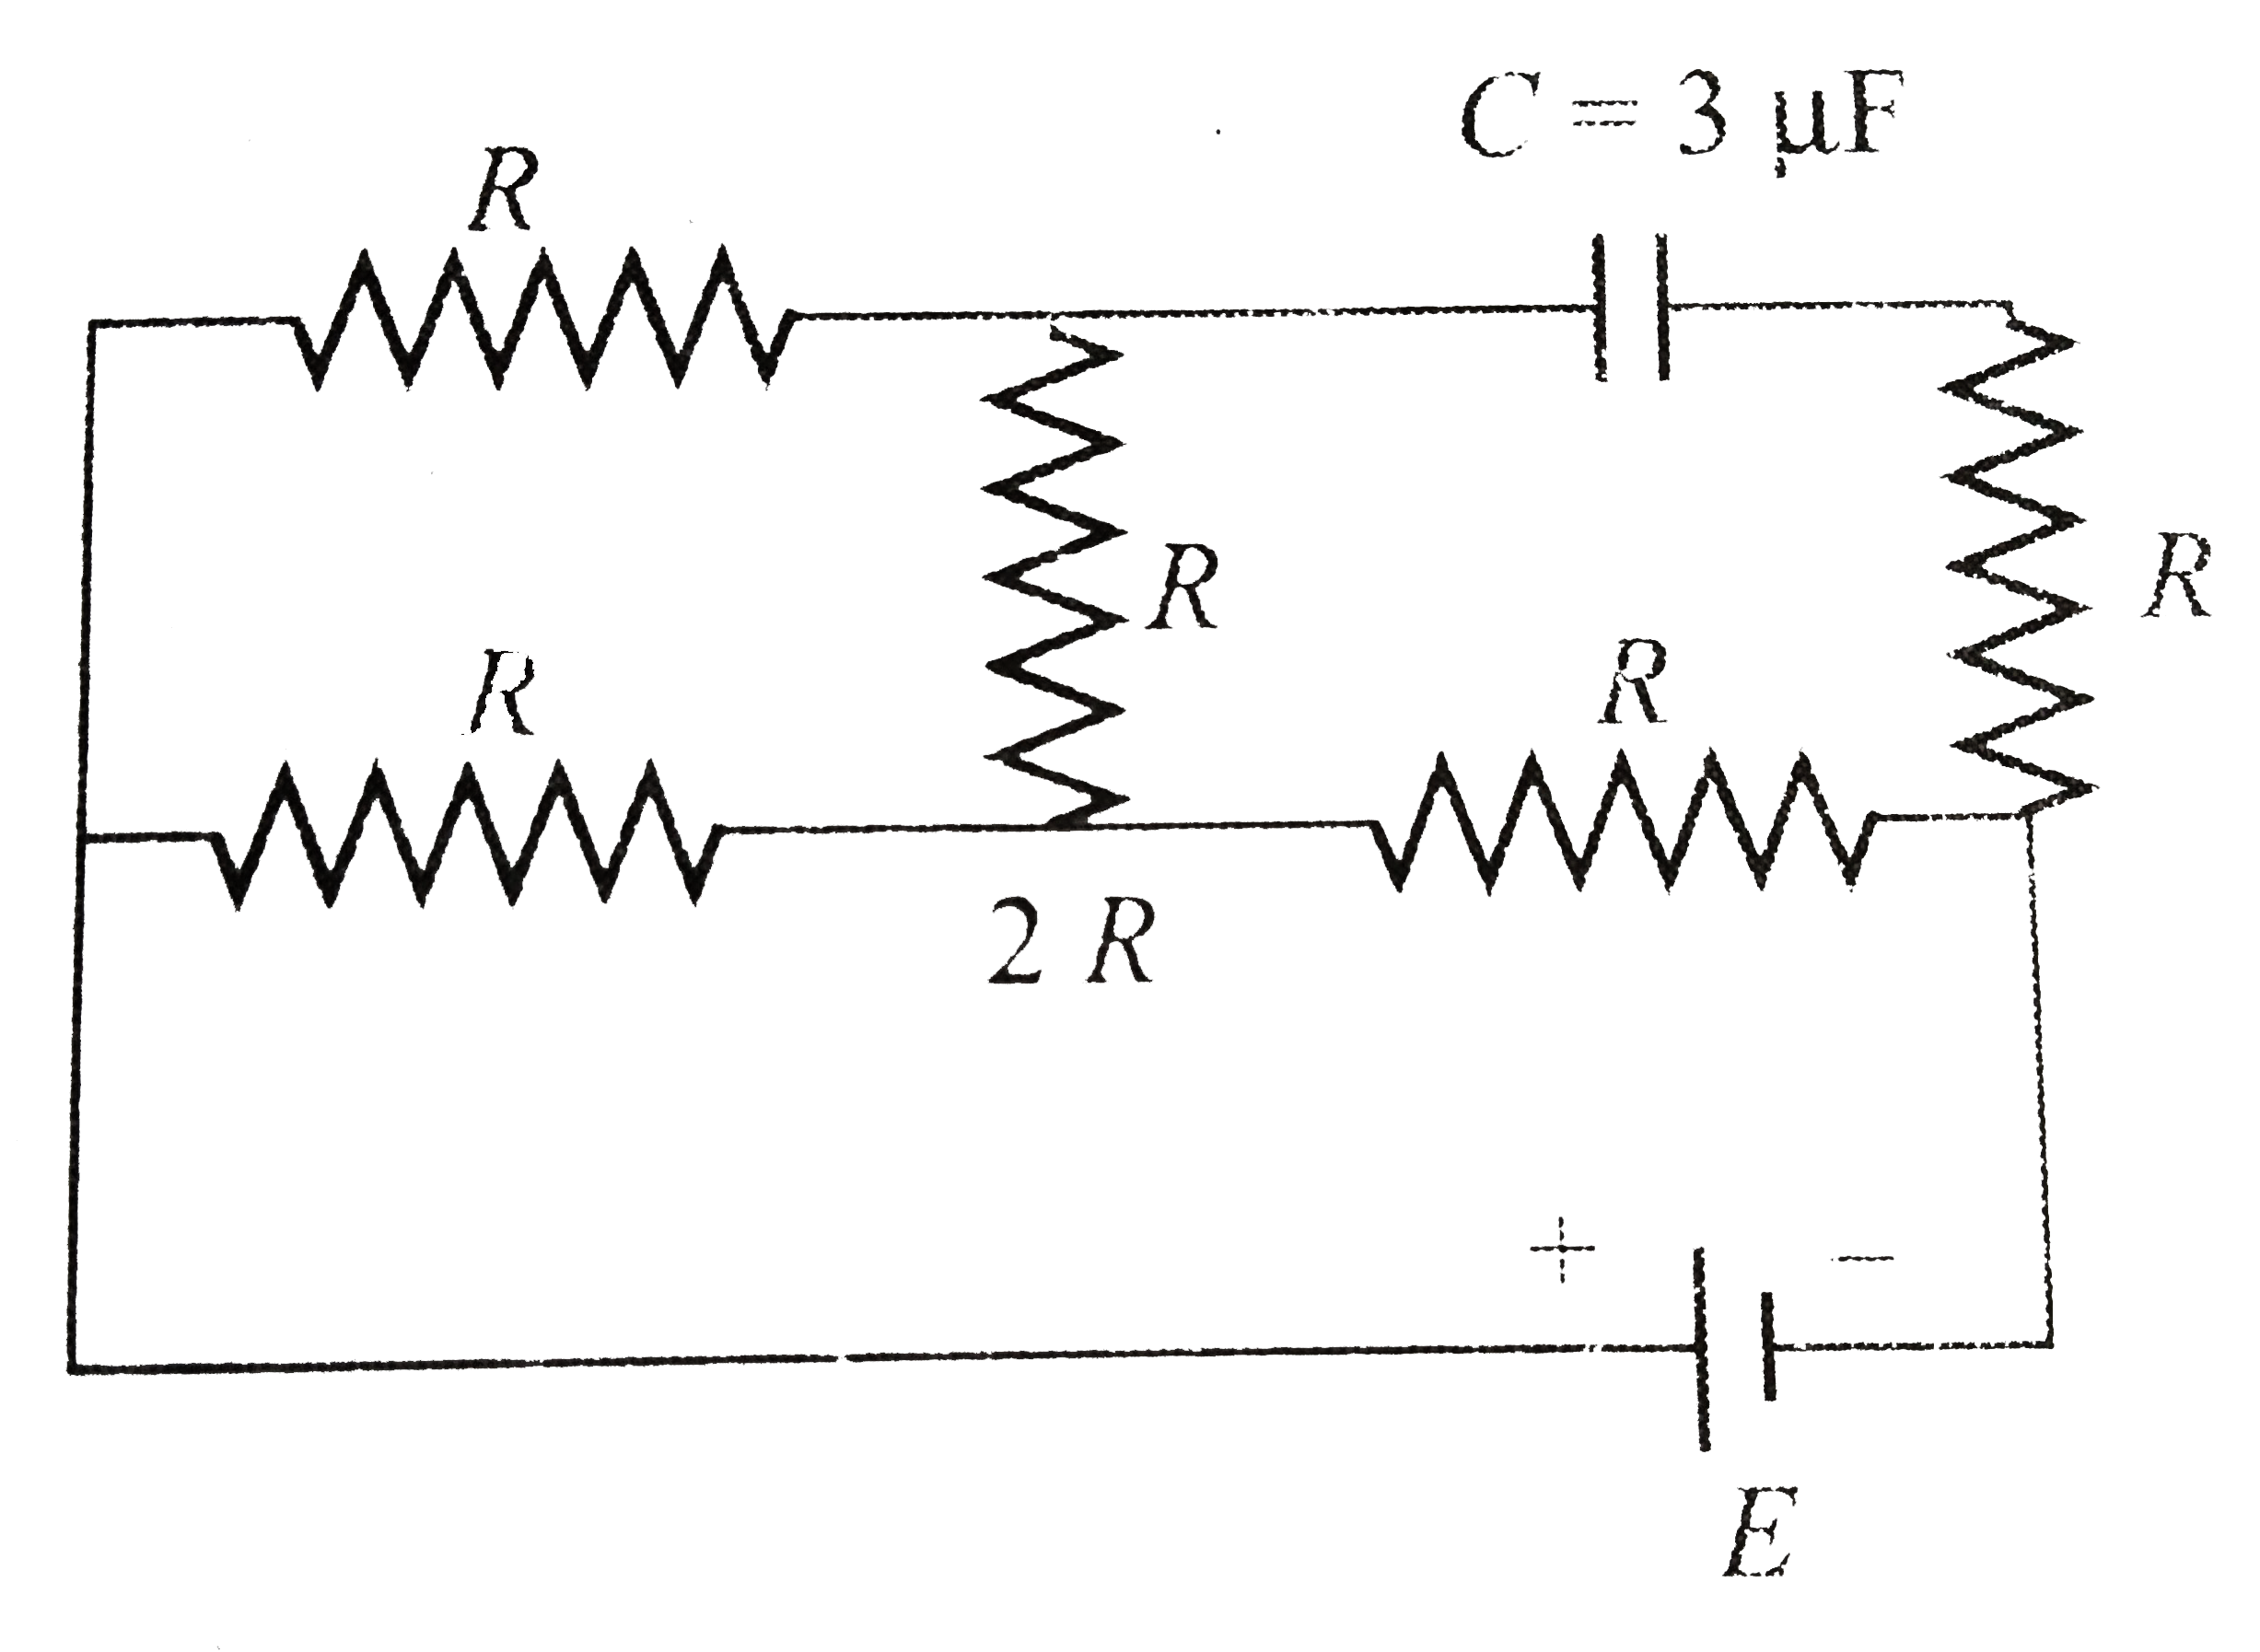 In the given circuit , the potential difference across the capacitor is 12 V. Each resistance is of 3 Omega. The cell is ideal. The emf of the cell is